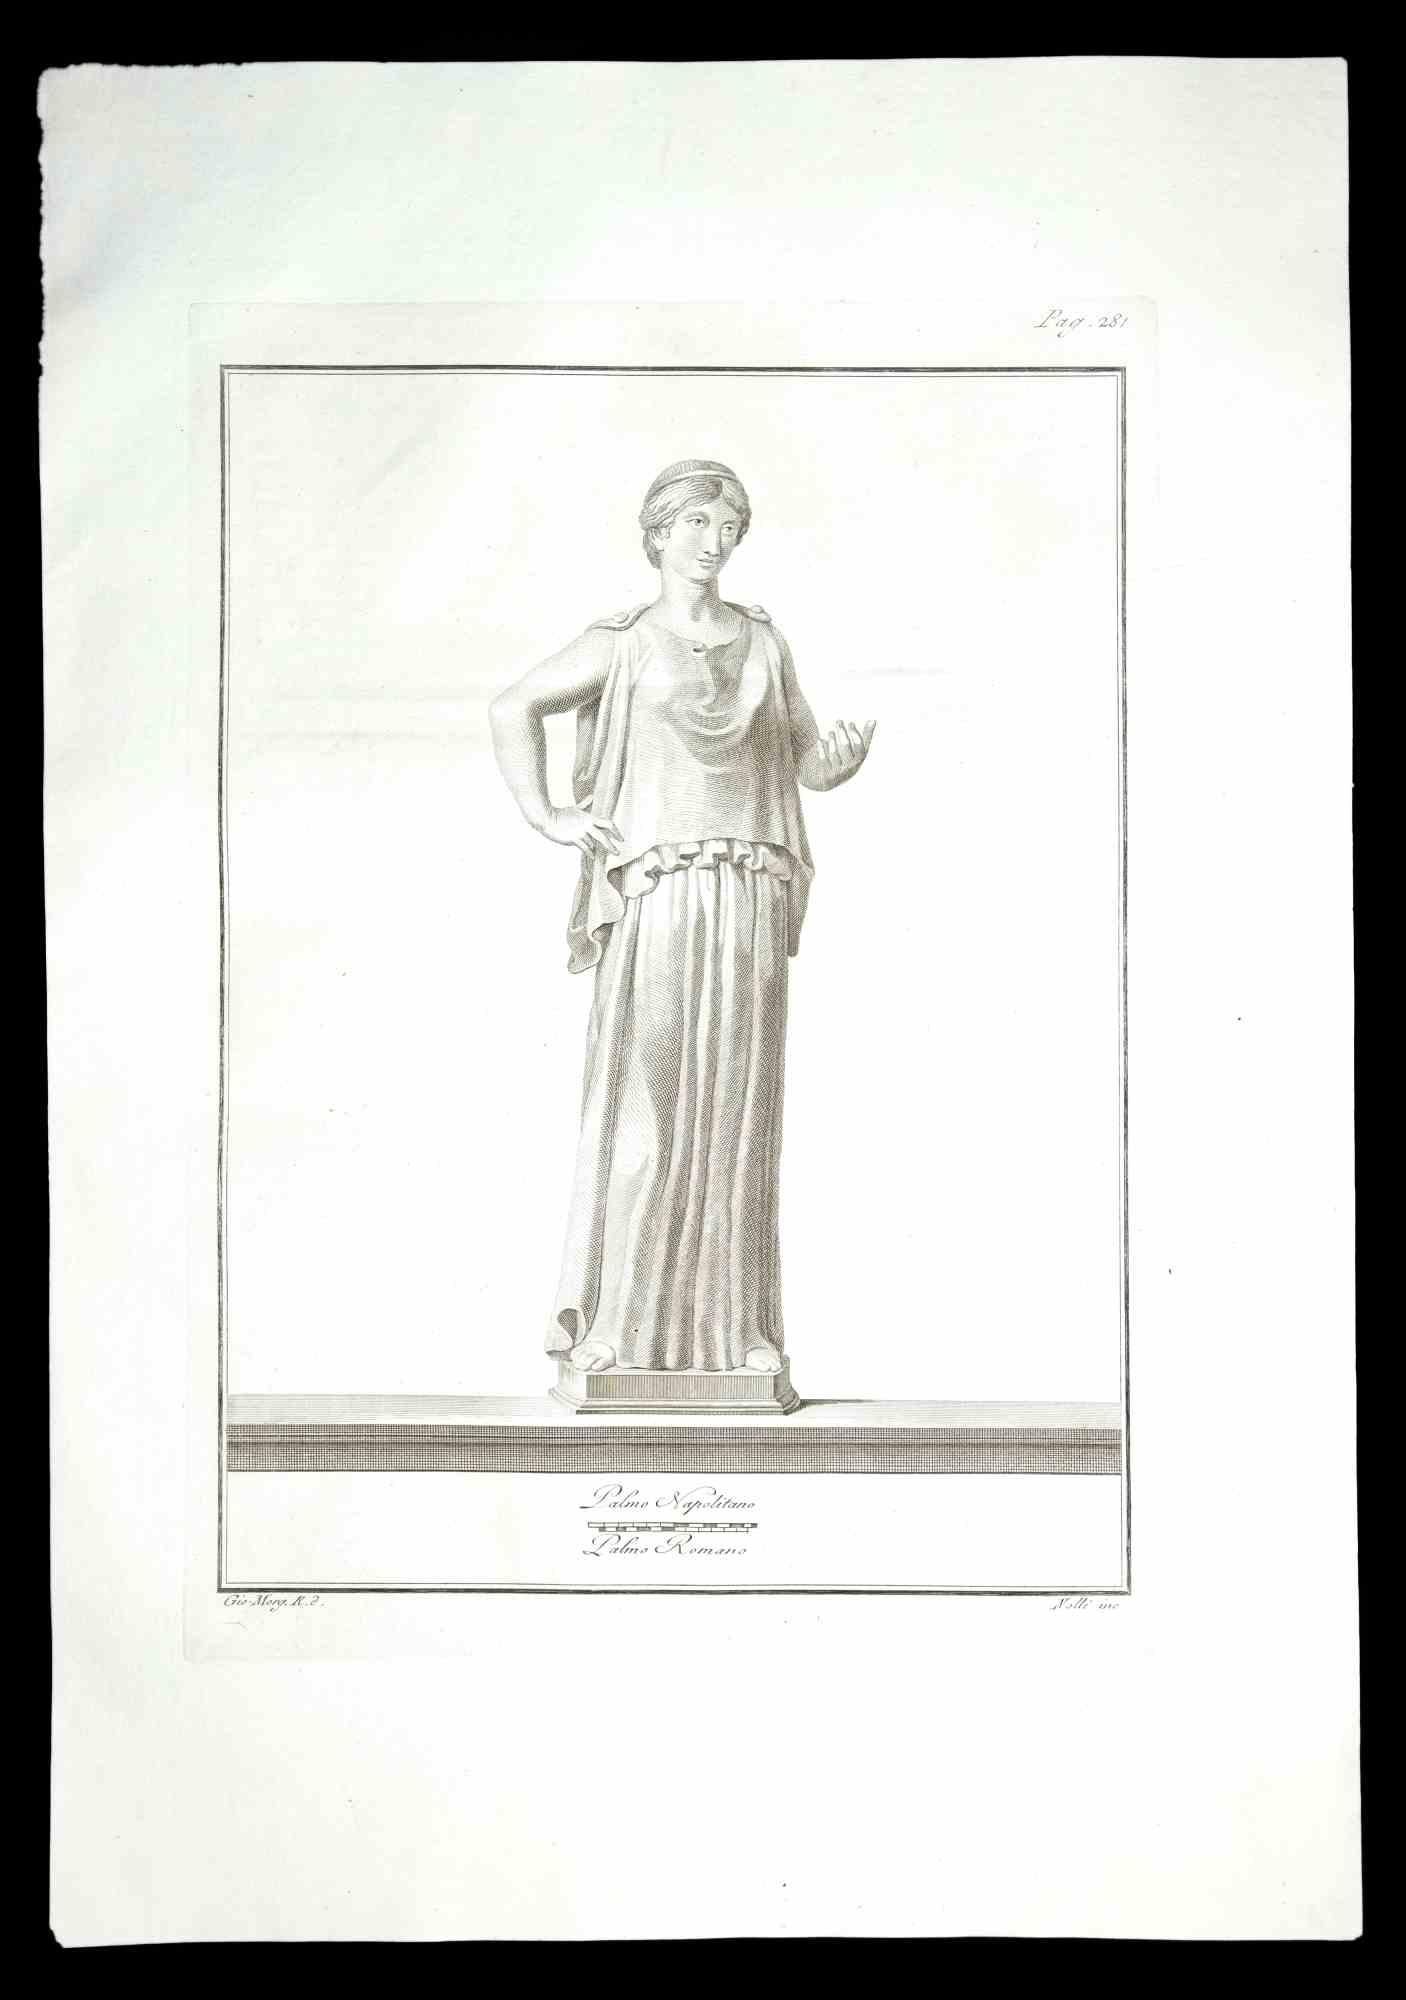 Ancient Roman Statue, from the series "Antiquities of Herculaneum", is an original etching on paper realized by Carlo Nolli in the 18th century.

Signed on the plate, on the lower right.

Good conditions.

The etching belongs to the print suite